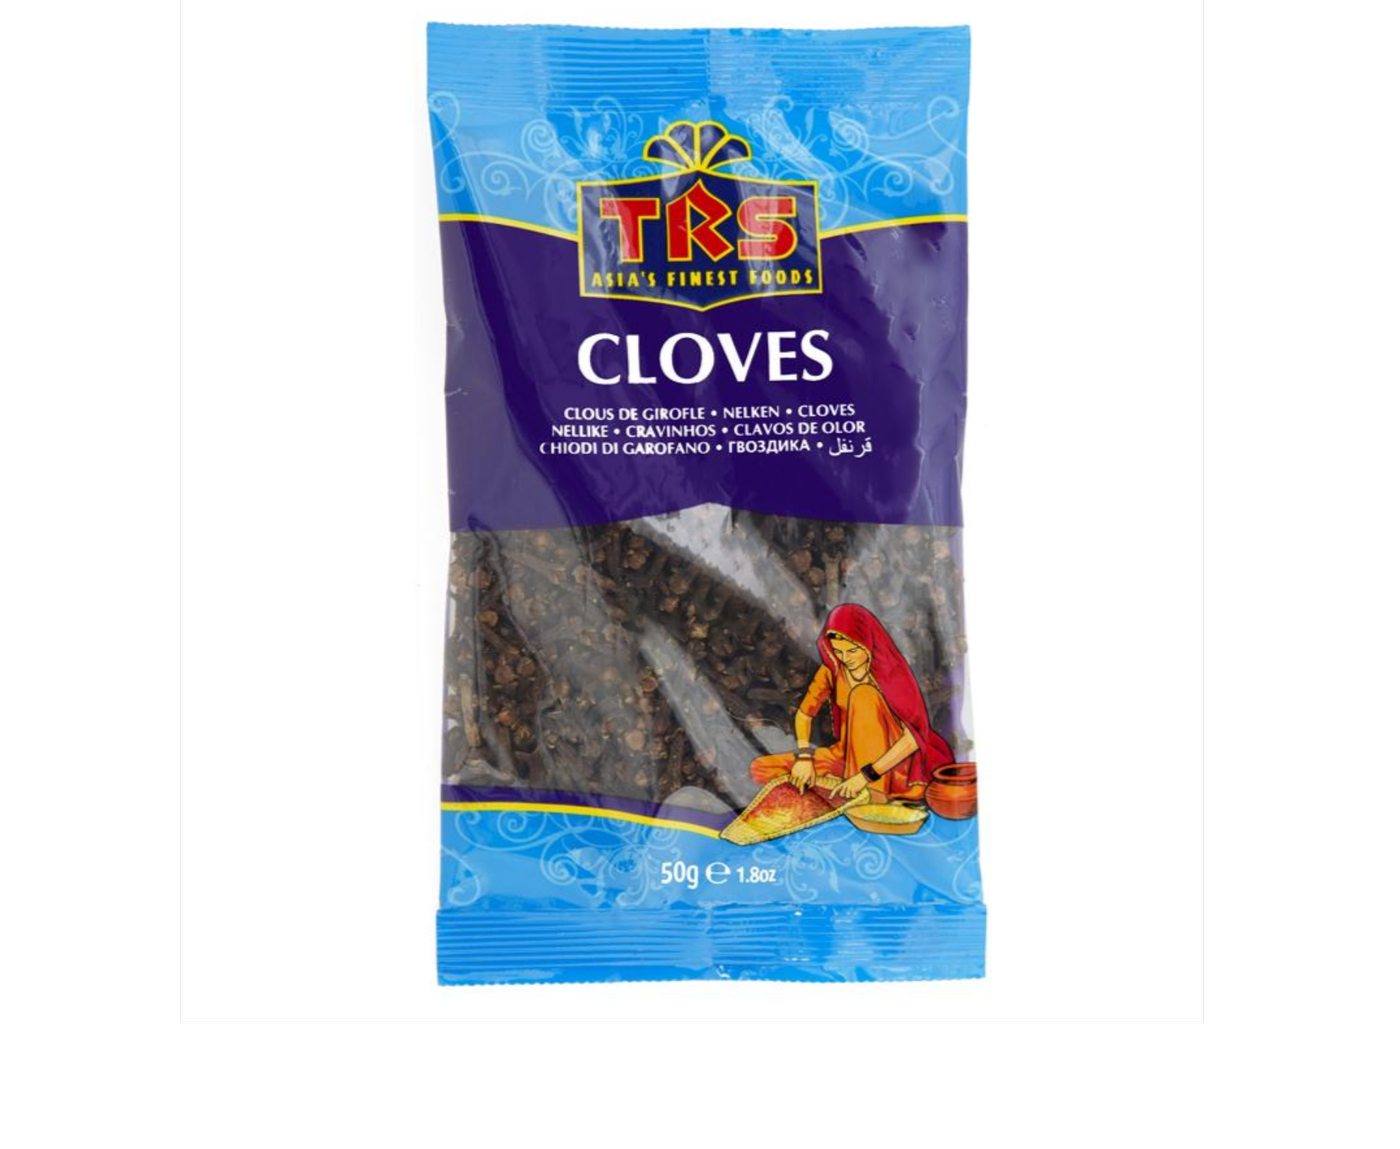 TRS Cloves Whole